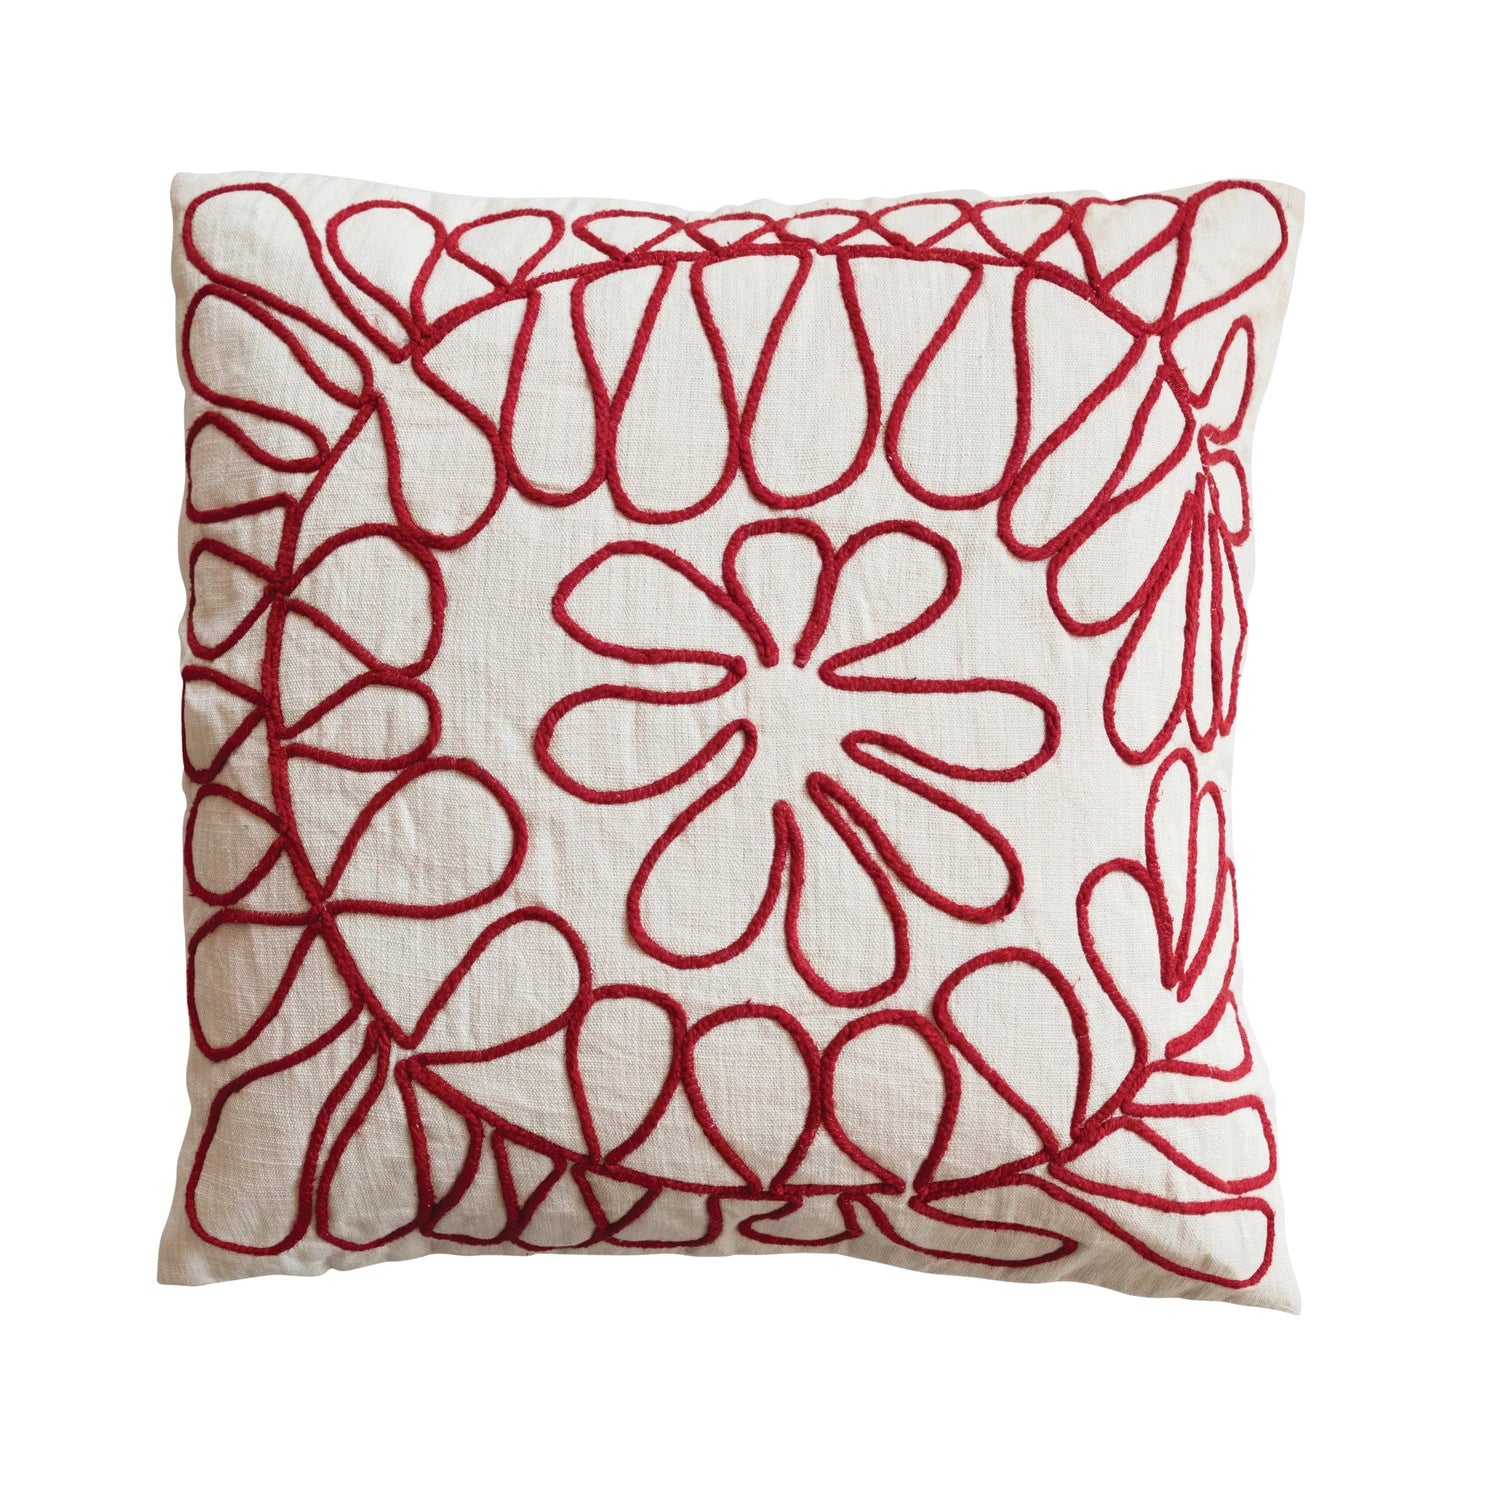 26" Red Embroidery Pillow